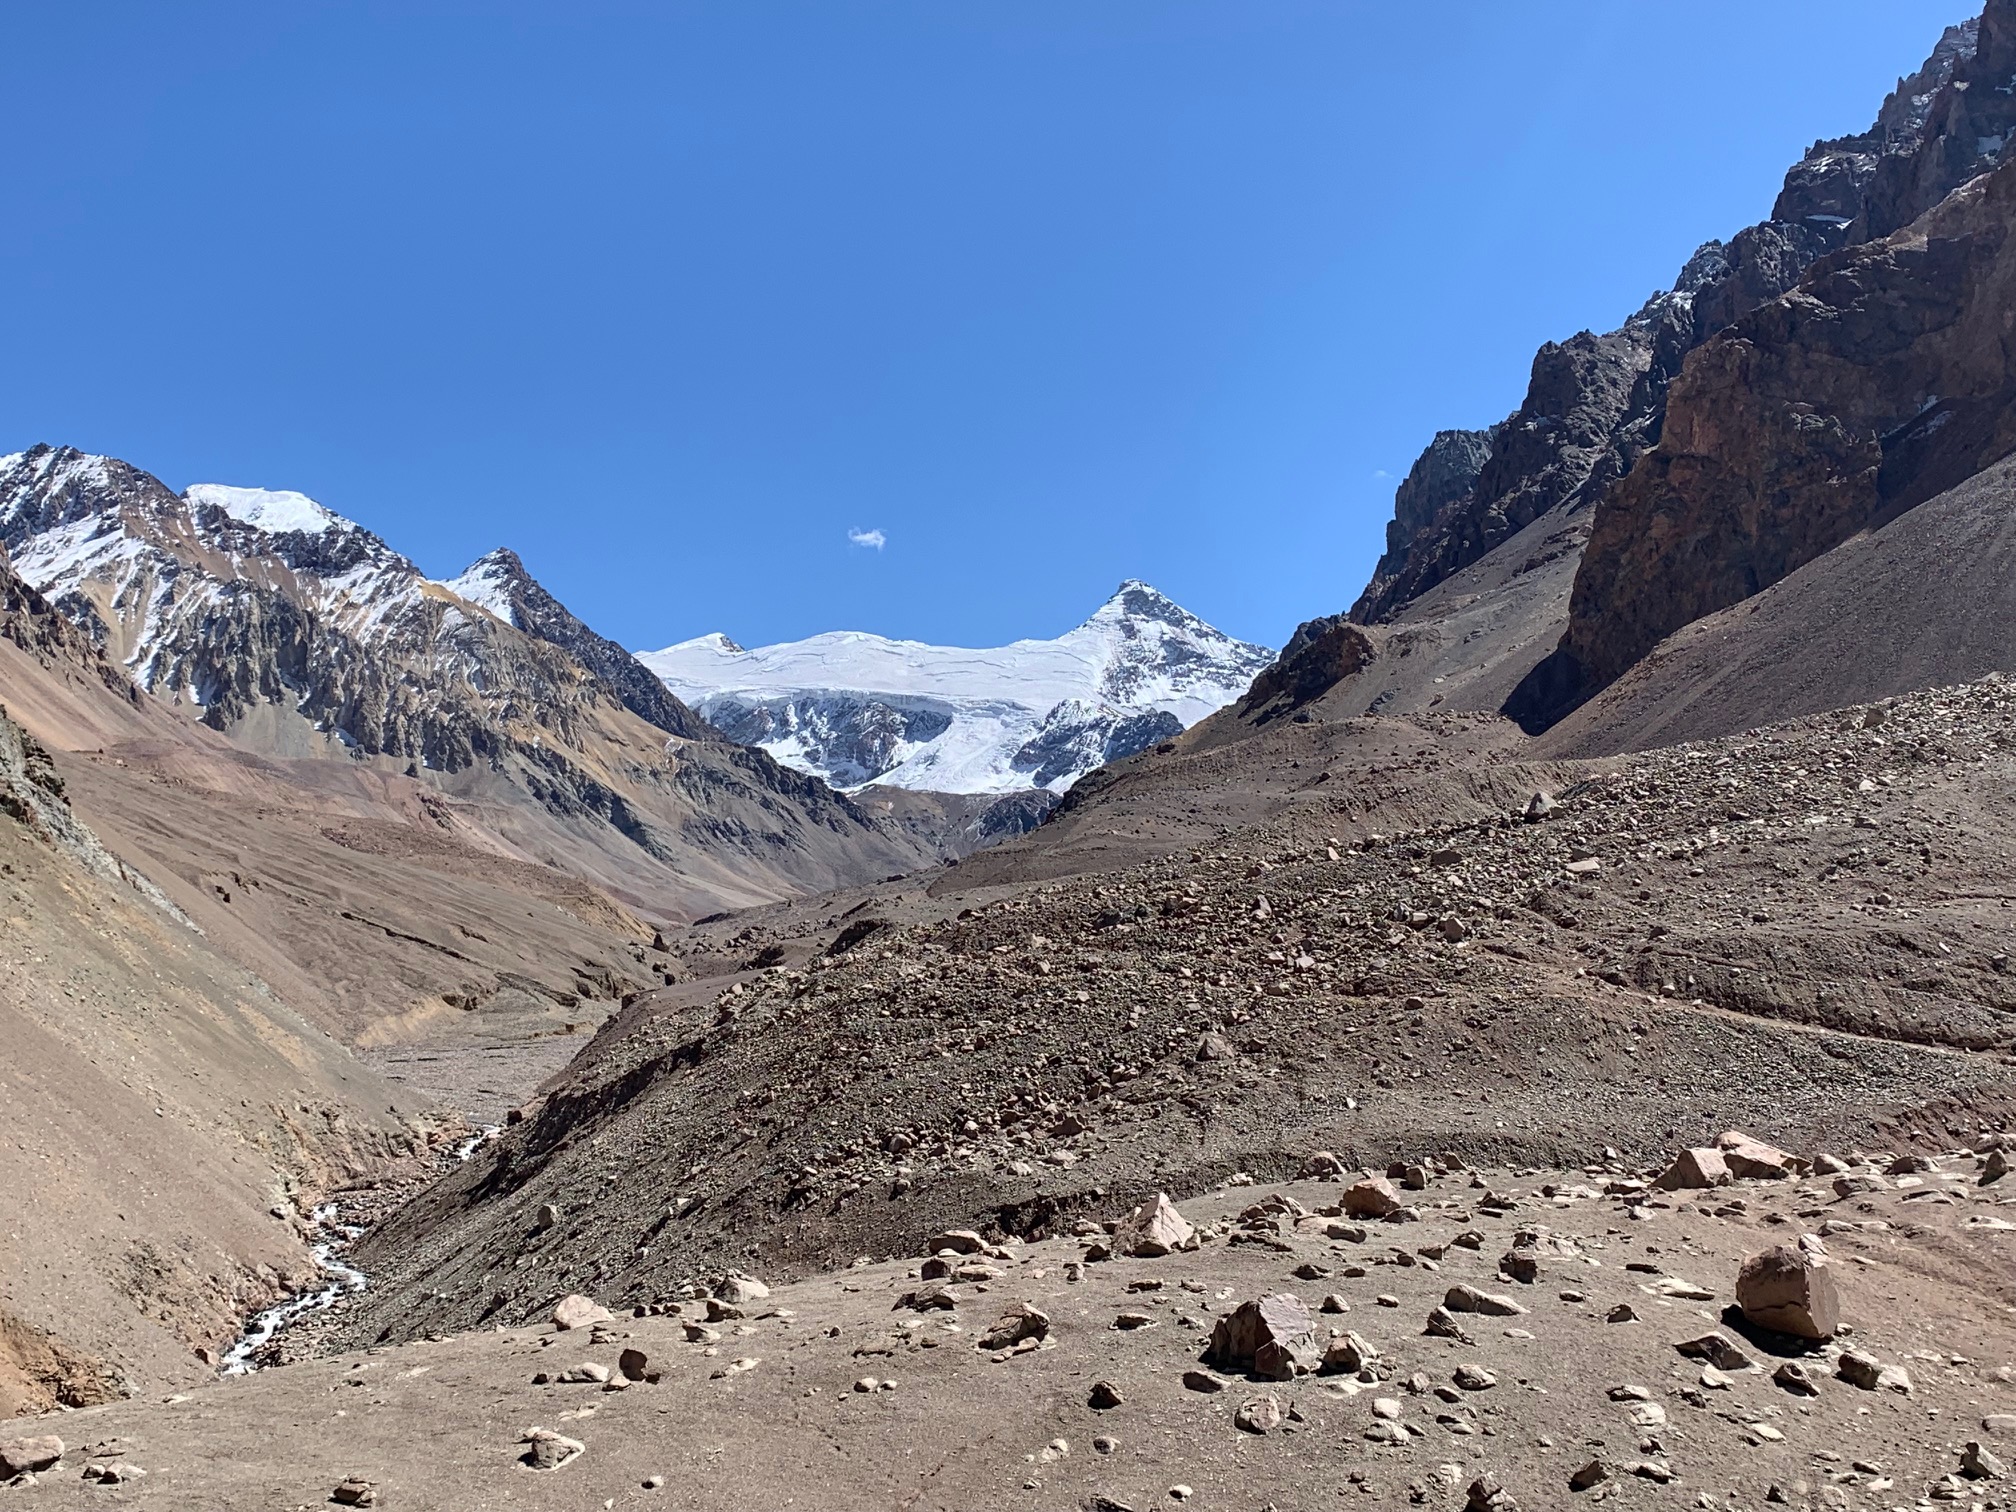 The route into Base Camp